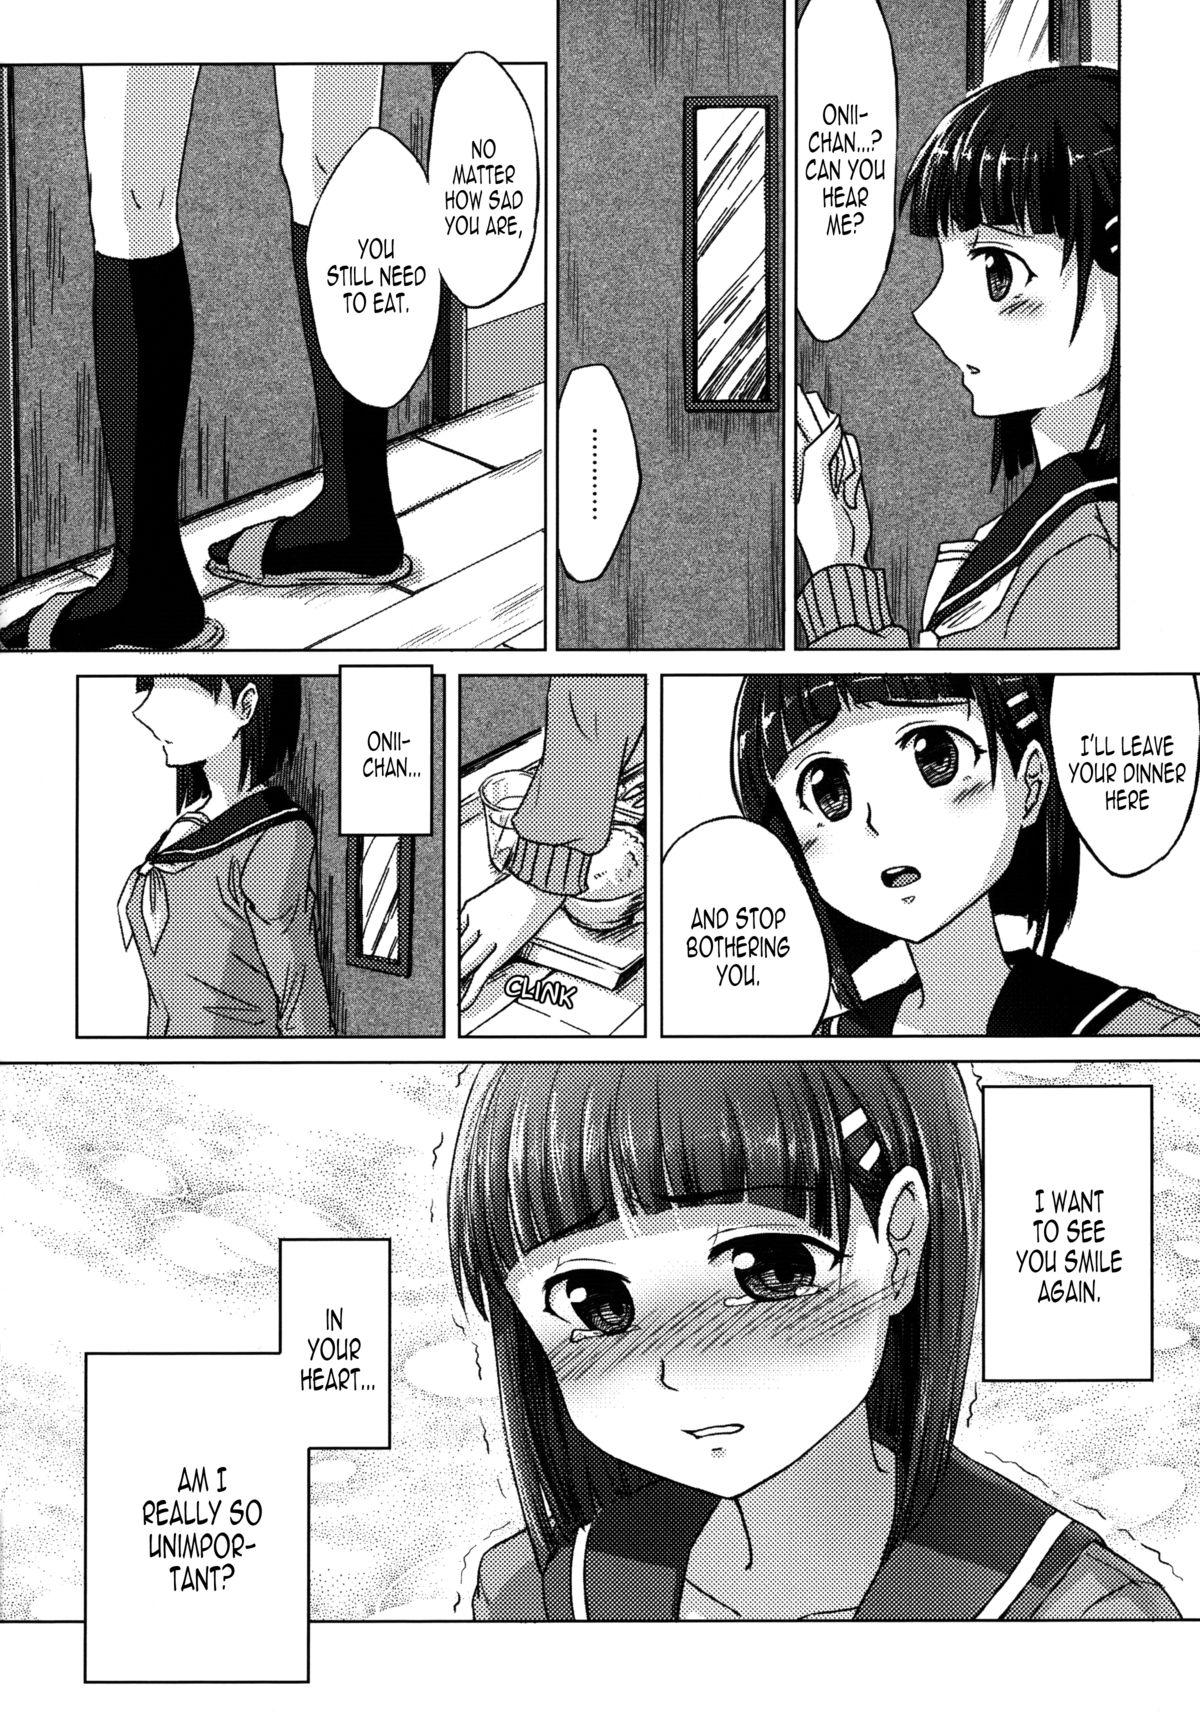 Motel Imouto no Mousou Record | Record of My Sister's Delusion - Sword art online Ffm - Page 6